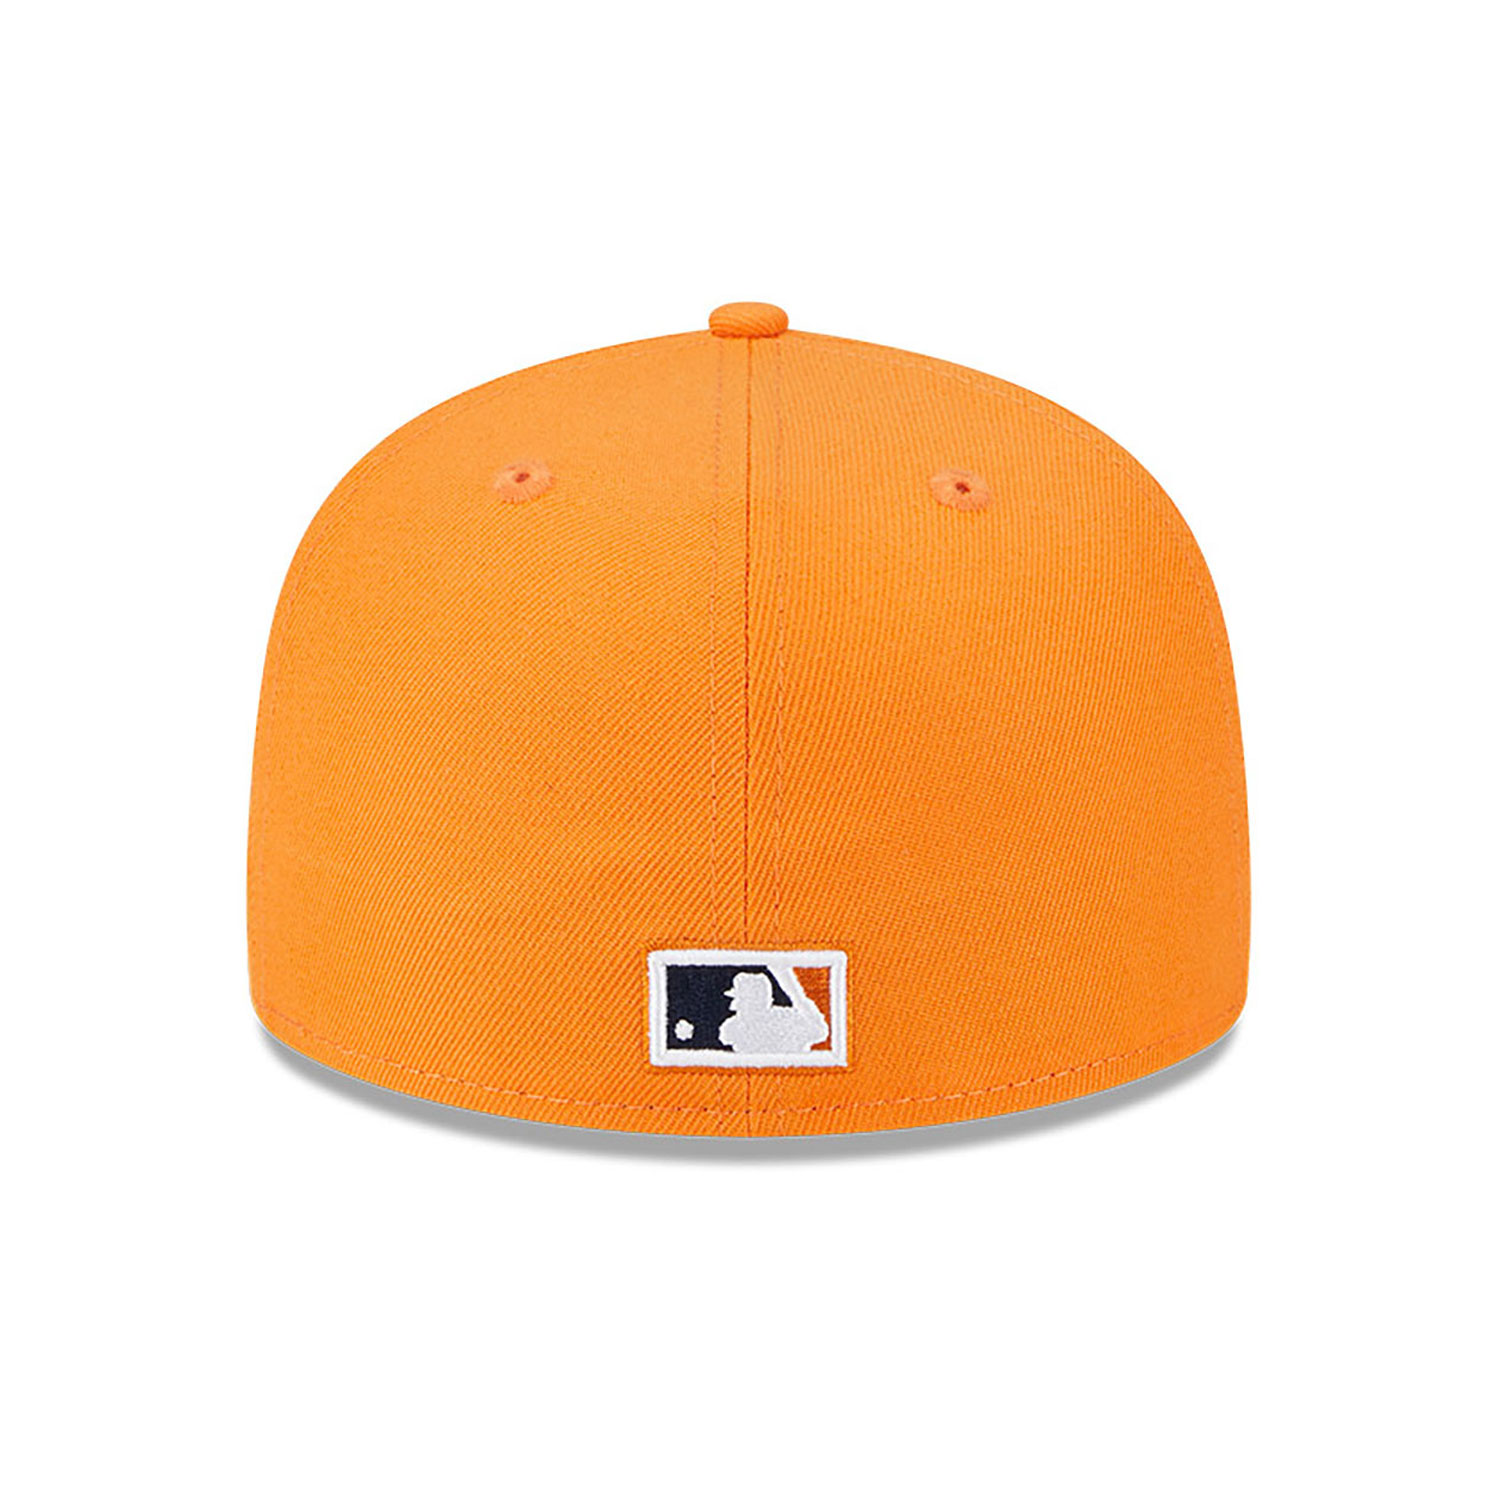 San Diego Padres MLB Cooperstown Orange 59FIFTY Fitted Cap